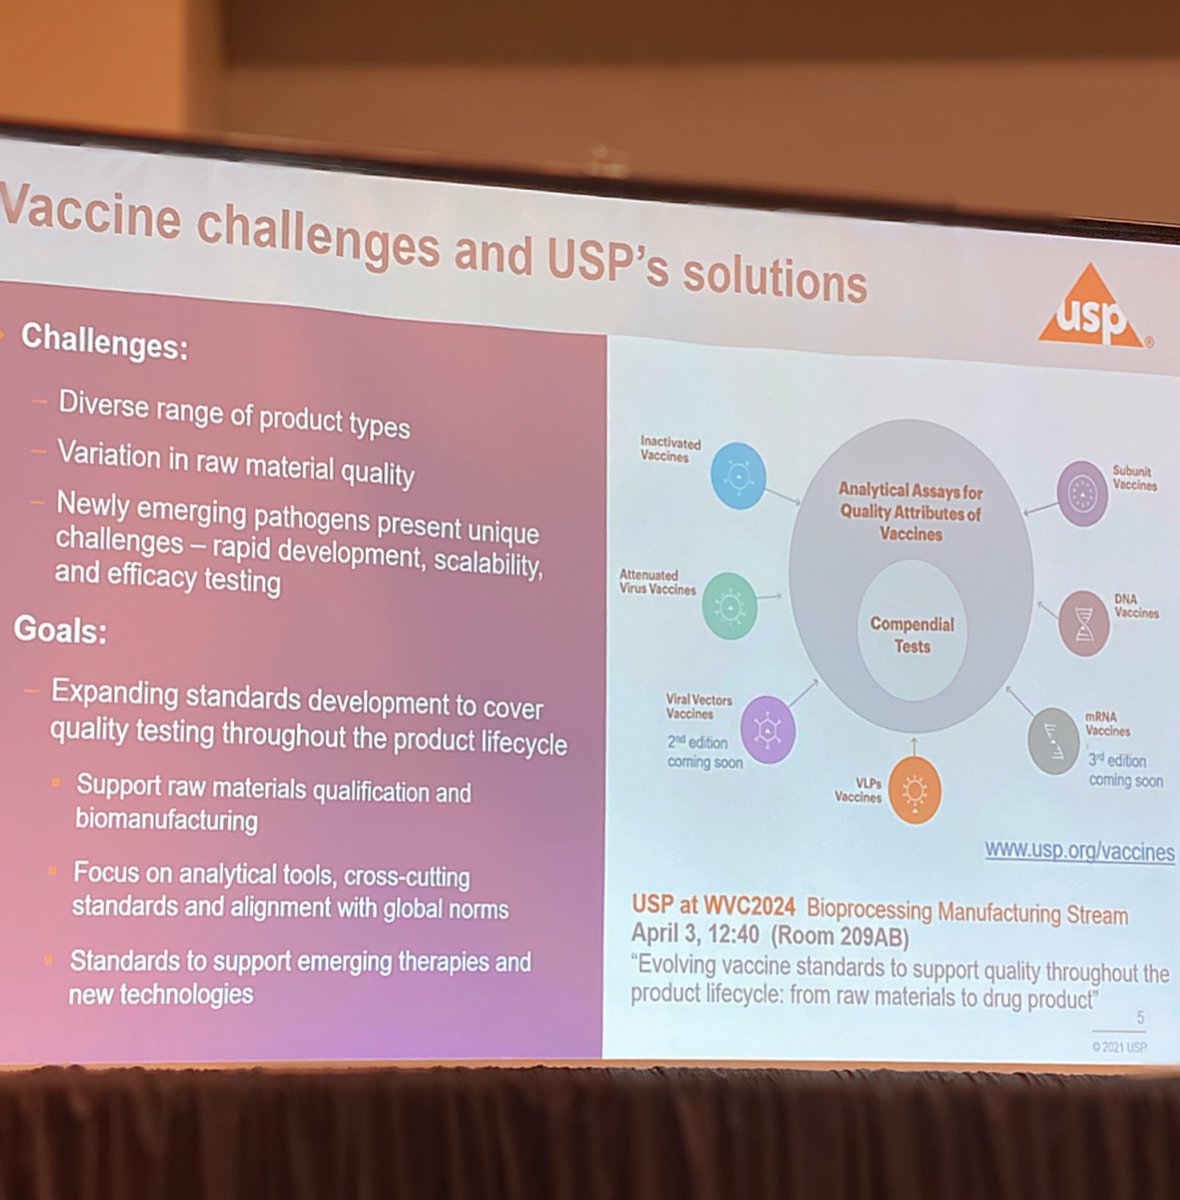 USP was honored to sponsor and participate at this year’s #WVCDC. It’s one of the largest and most impactful gatherings for advancing global public health and vaccine readiness. Learn more below, and we hope you’ll join us next year: